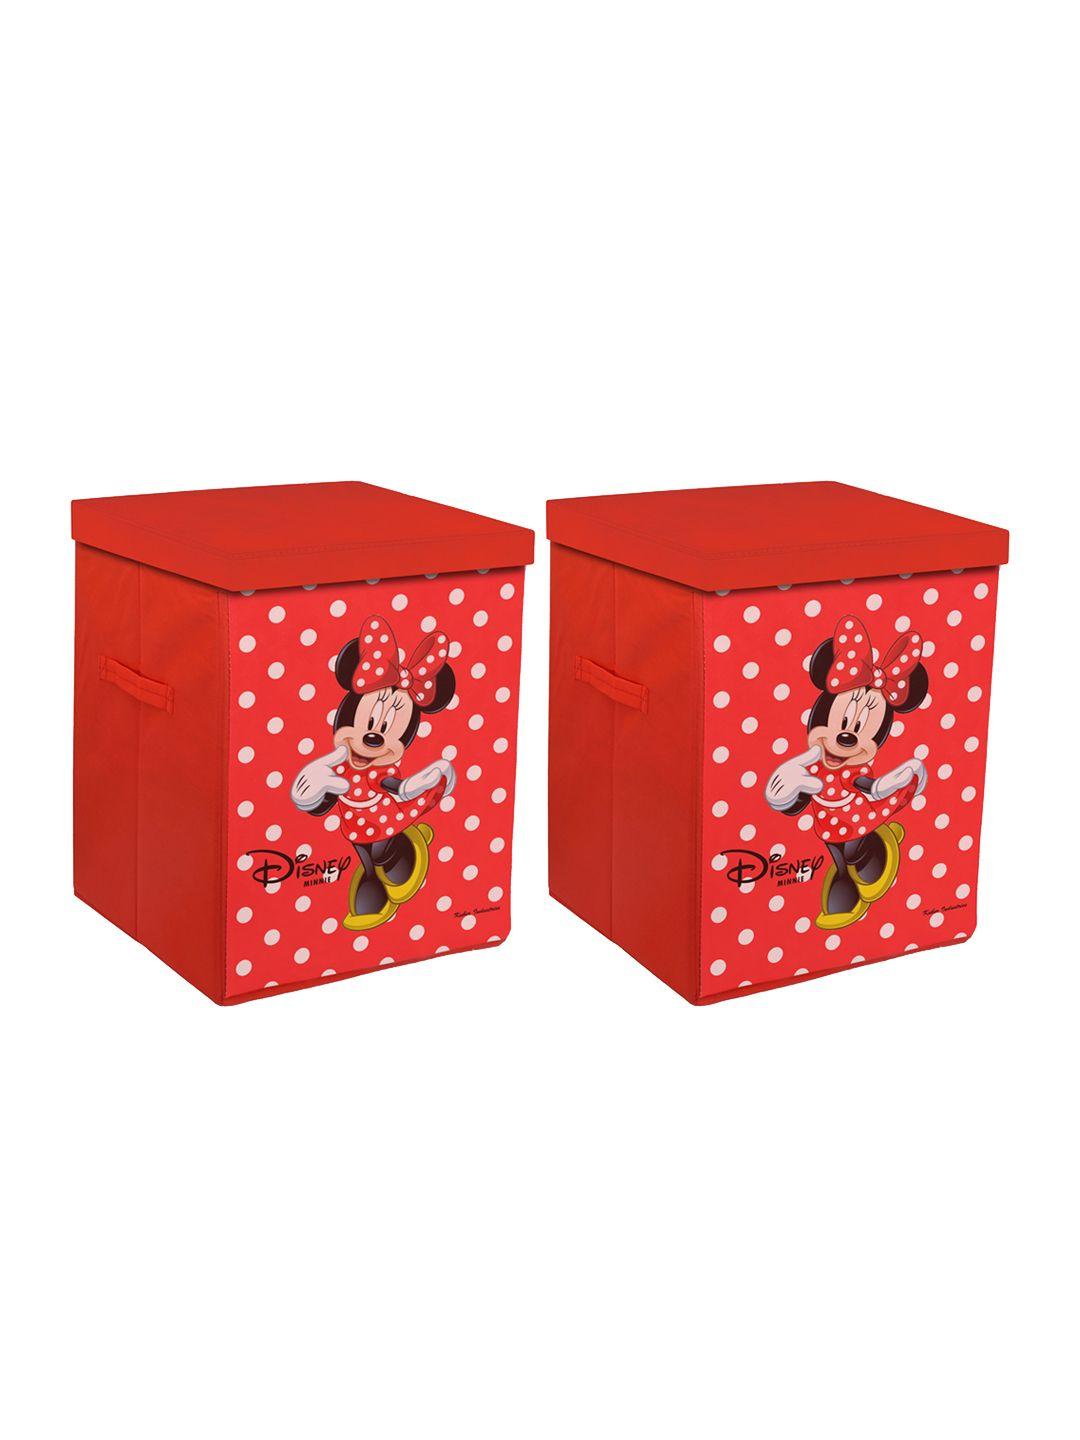 kuber industries set of 2 red & white minnie mouse printed foldable cloth storage baskets